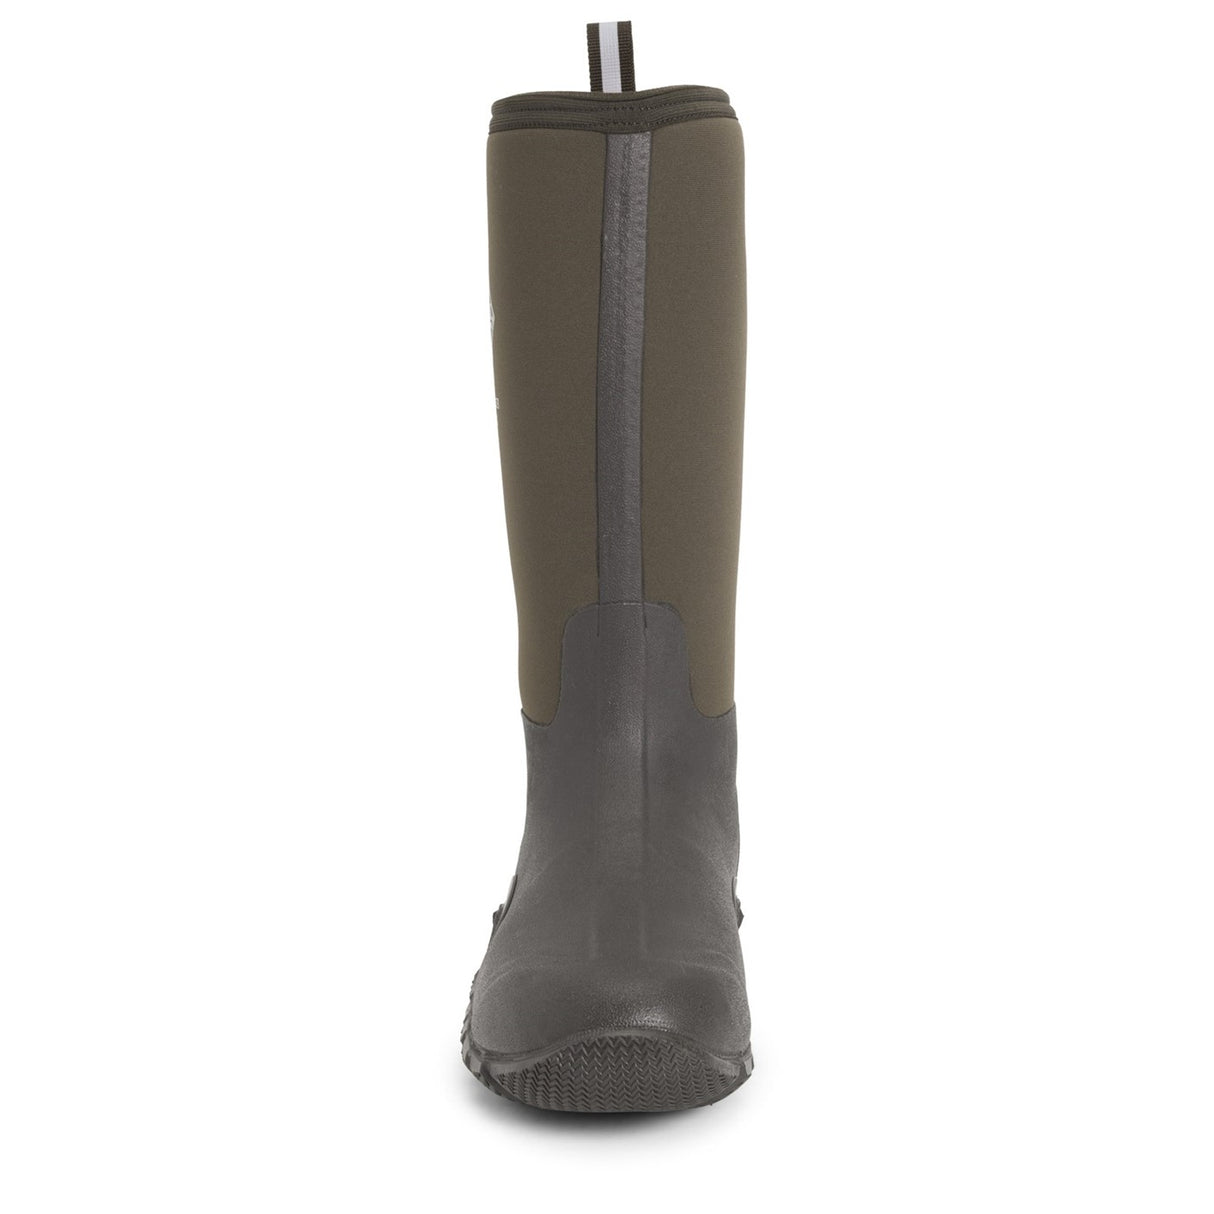 Unisex Edgewater Classic Tall Boots Brown